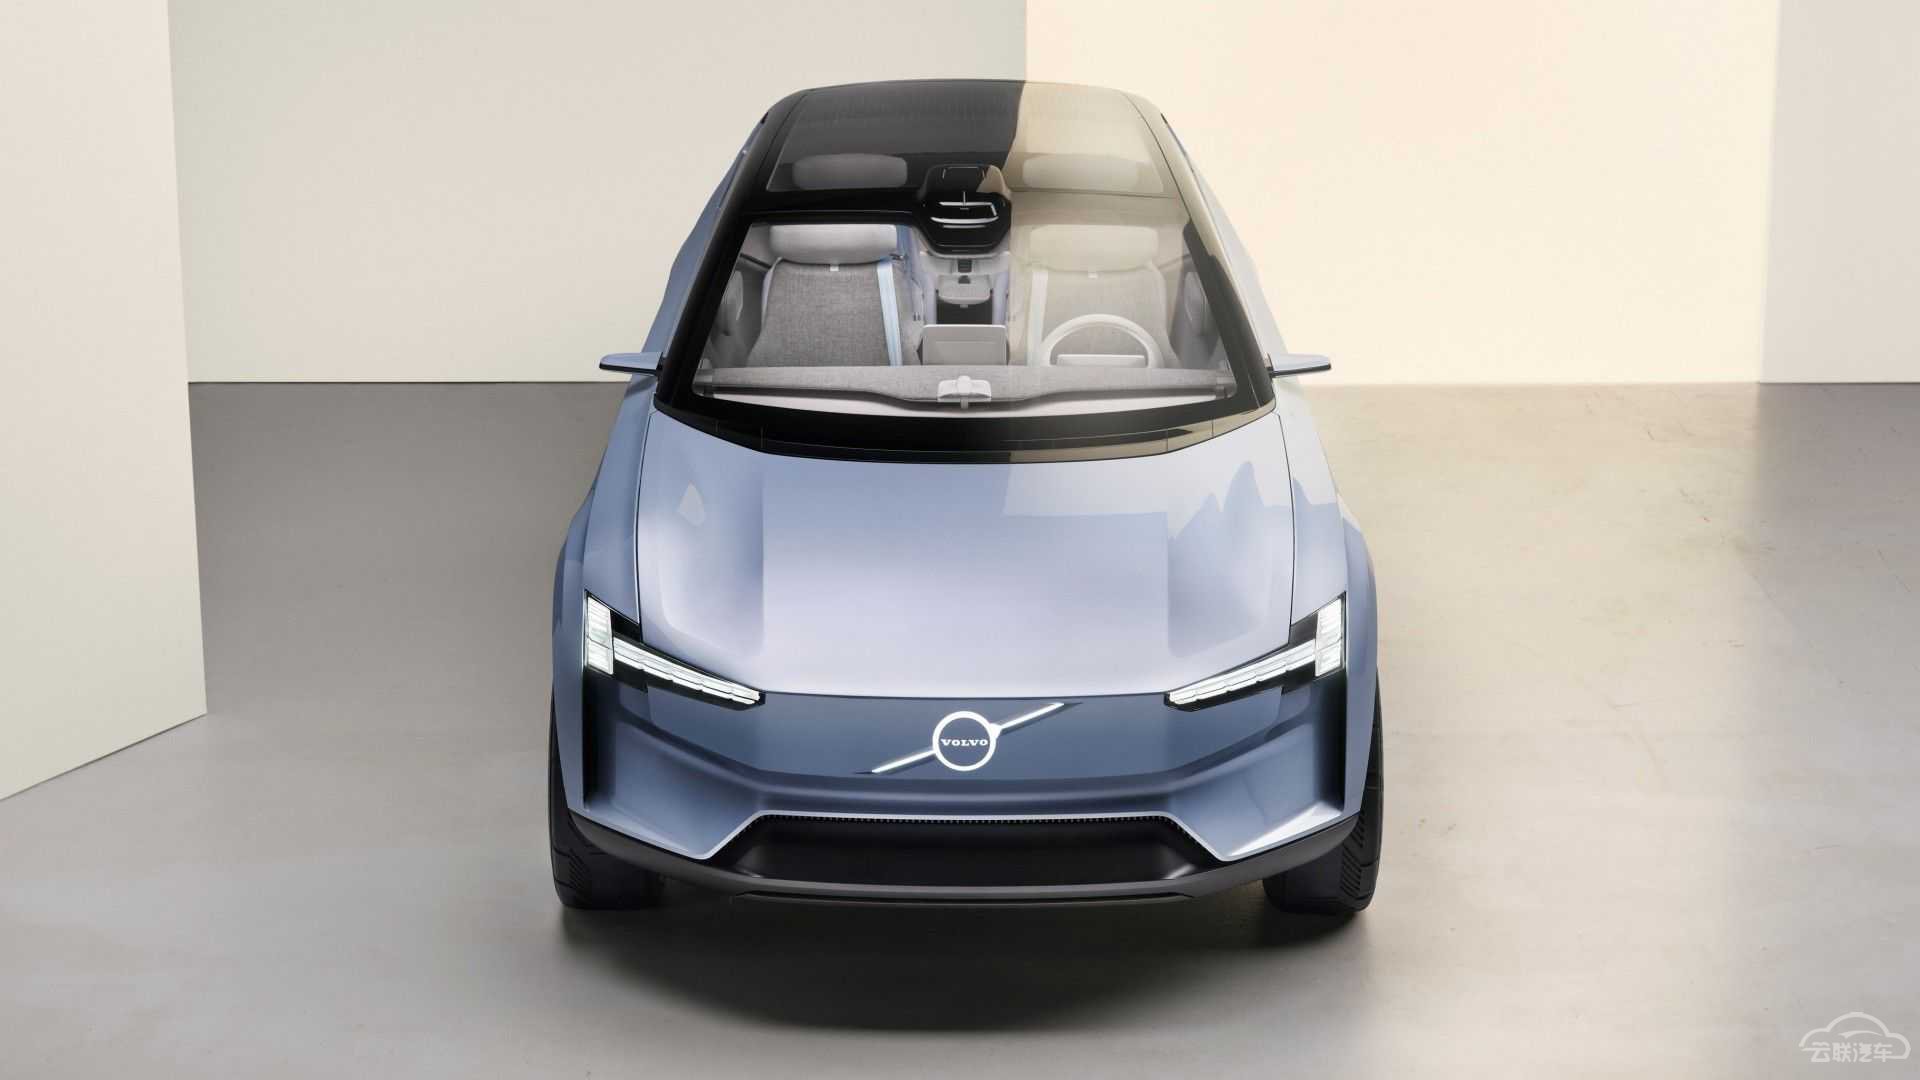 volvo-concept-recharge-exterior-front-view.jpg